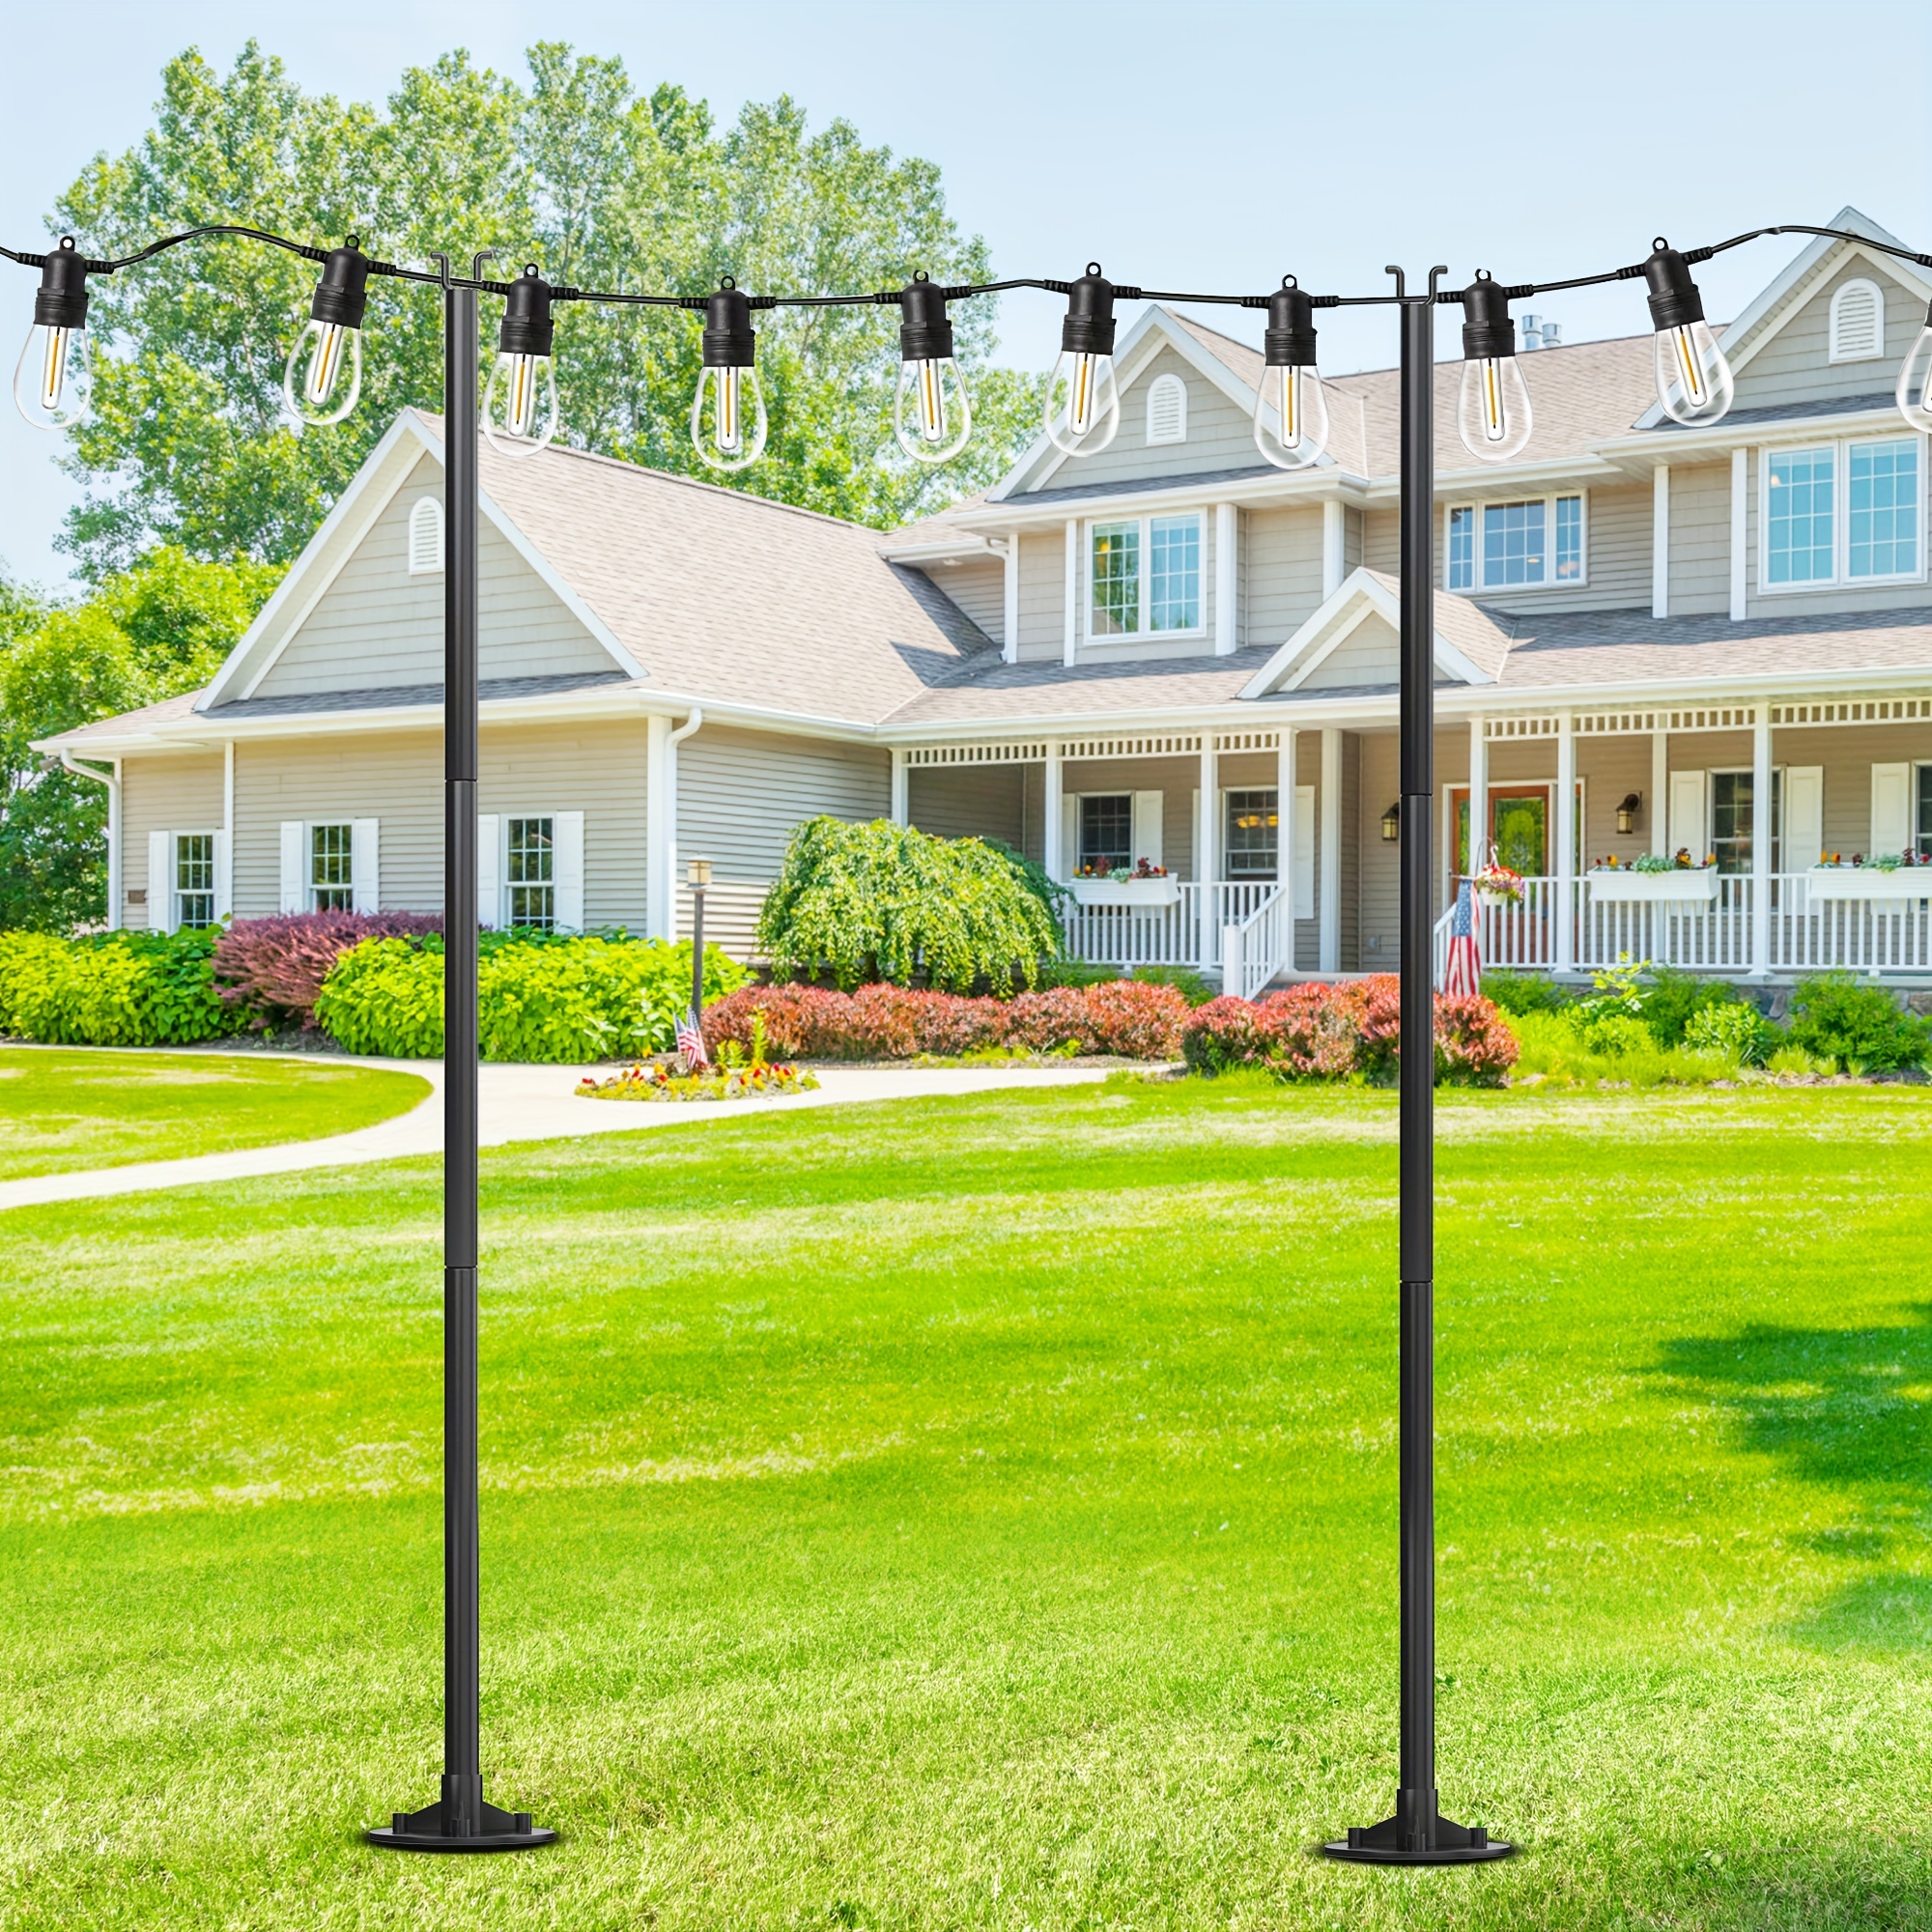 

Yarsca 4/6/8/10 Pack String Light Pole, 11ft 4-in-1 Outdoor String Light Pole Stand To Hang String Lights For Patio, Garden, Backyard, Wedding, Parties, Deck, Fence - Classic Black